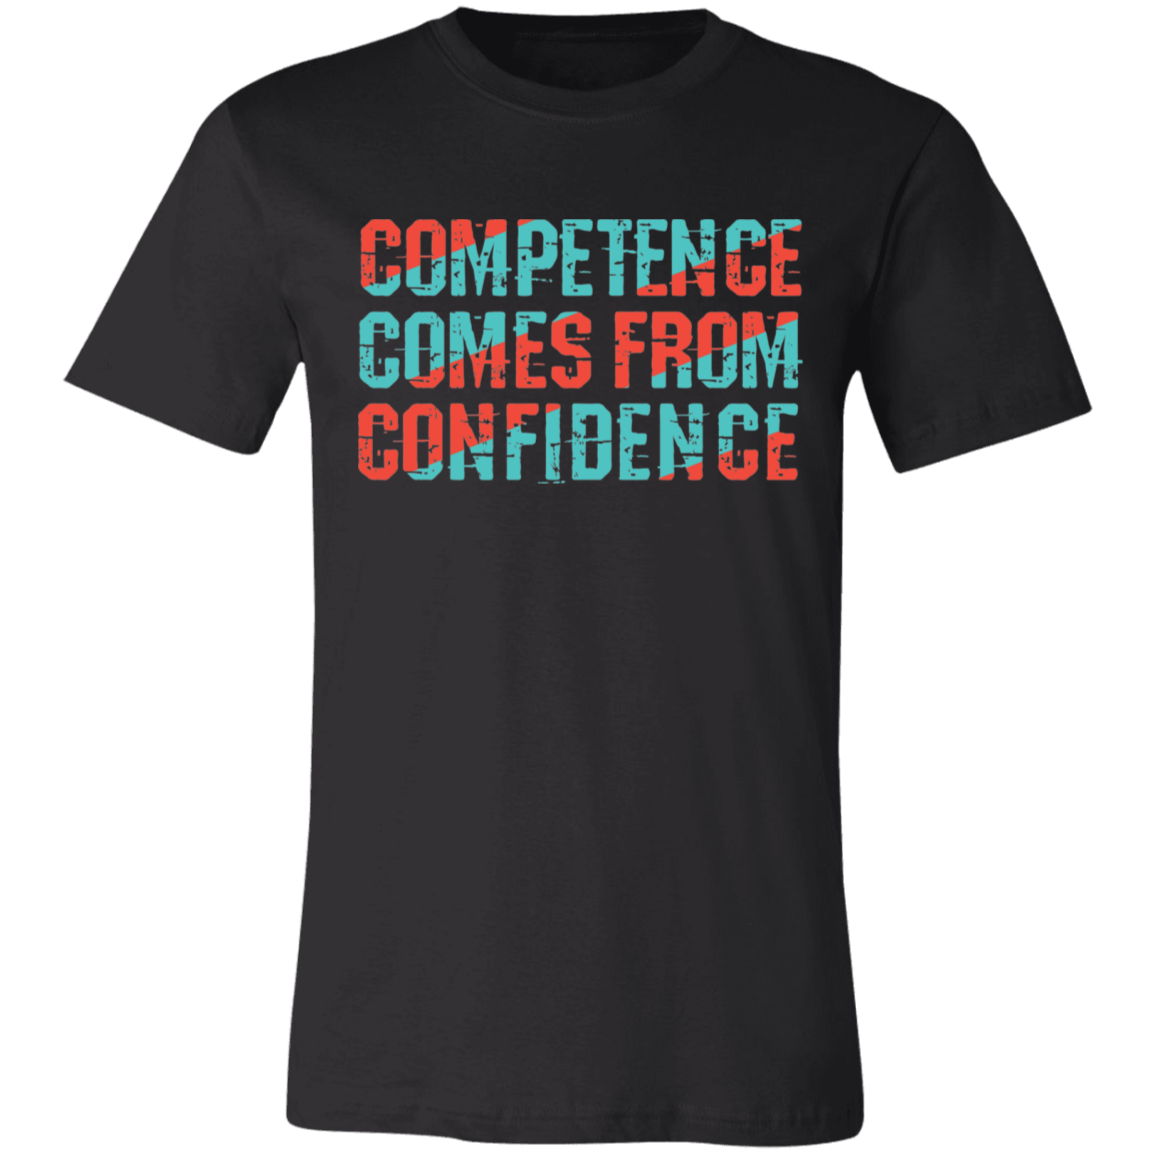 Competence comes from Confidence T-shirt